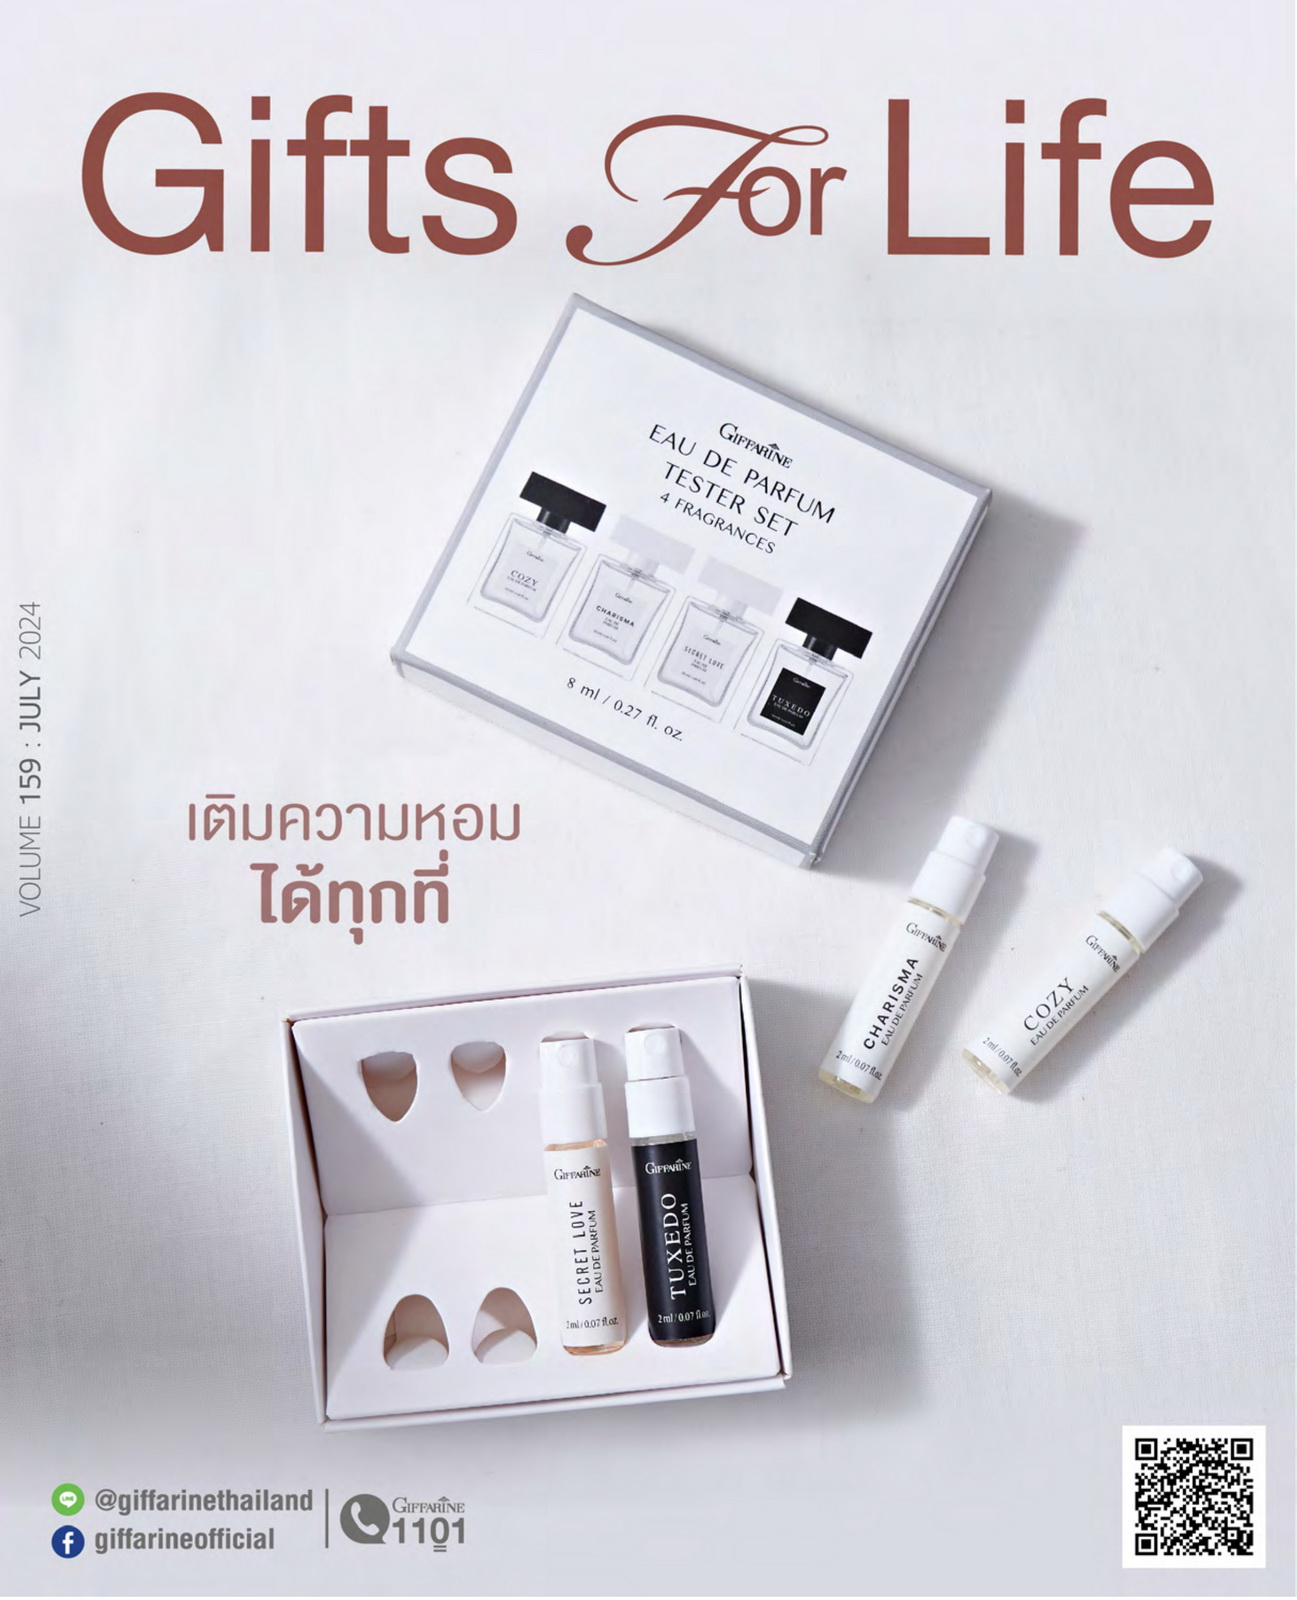 Gifts For Life กรกฎาคม 2567